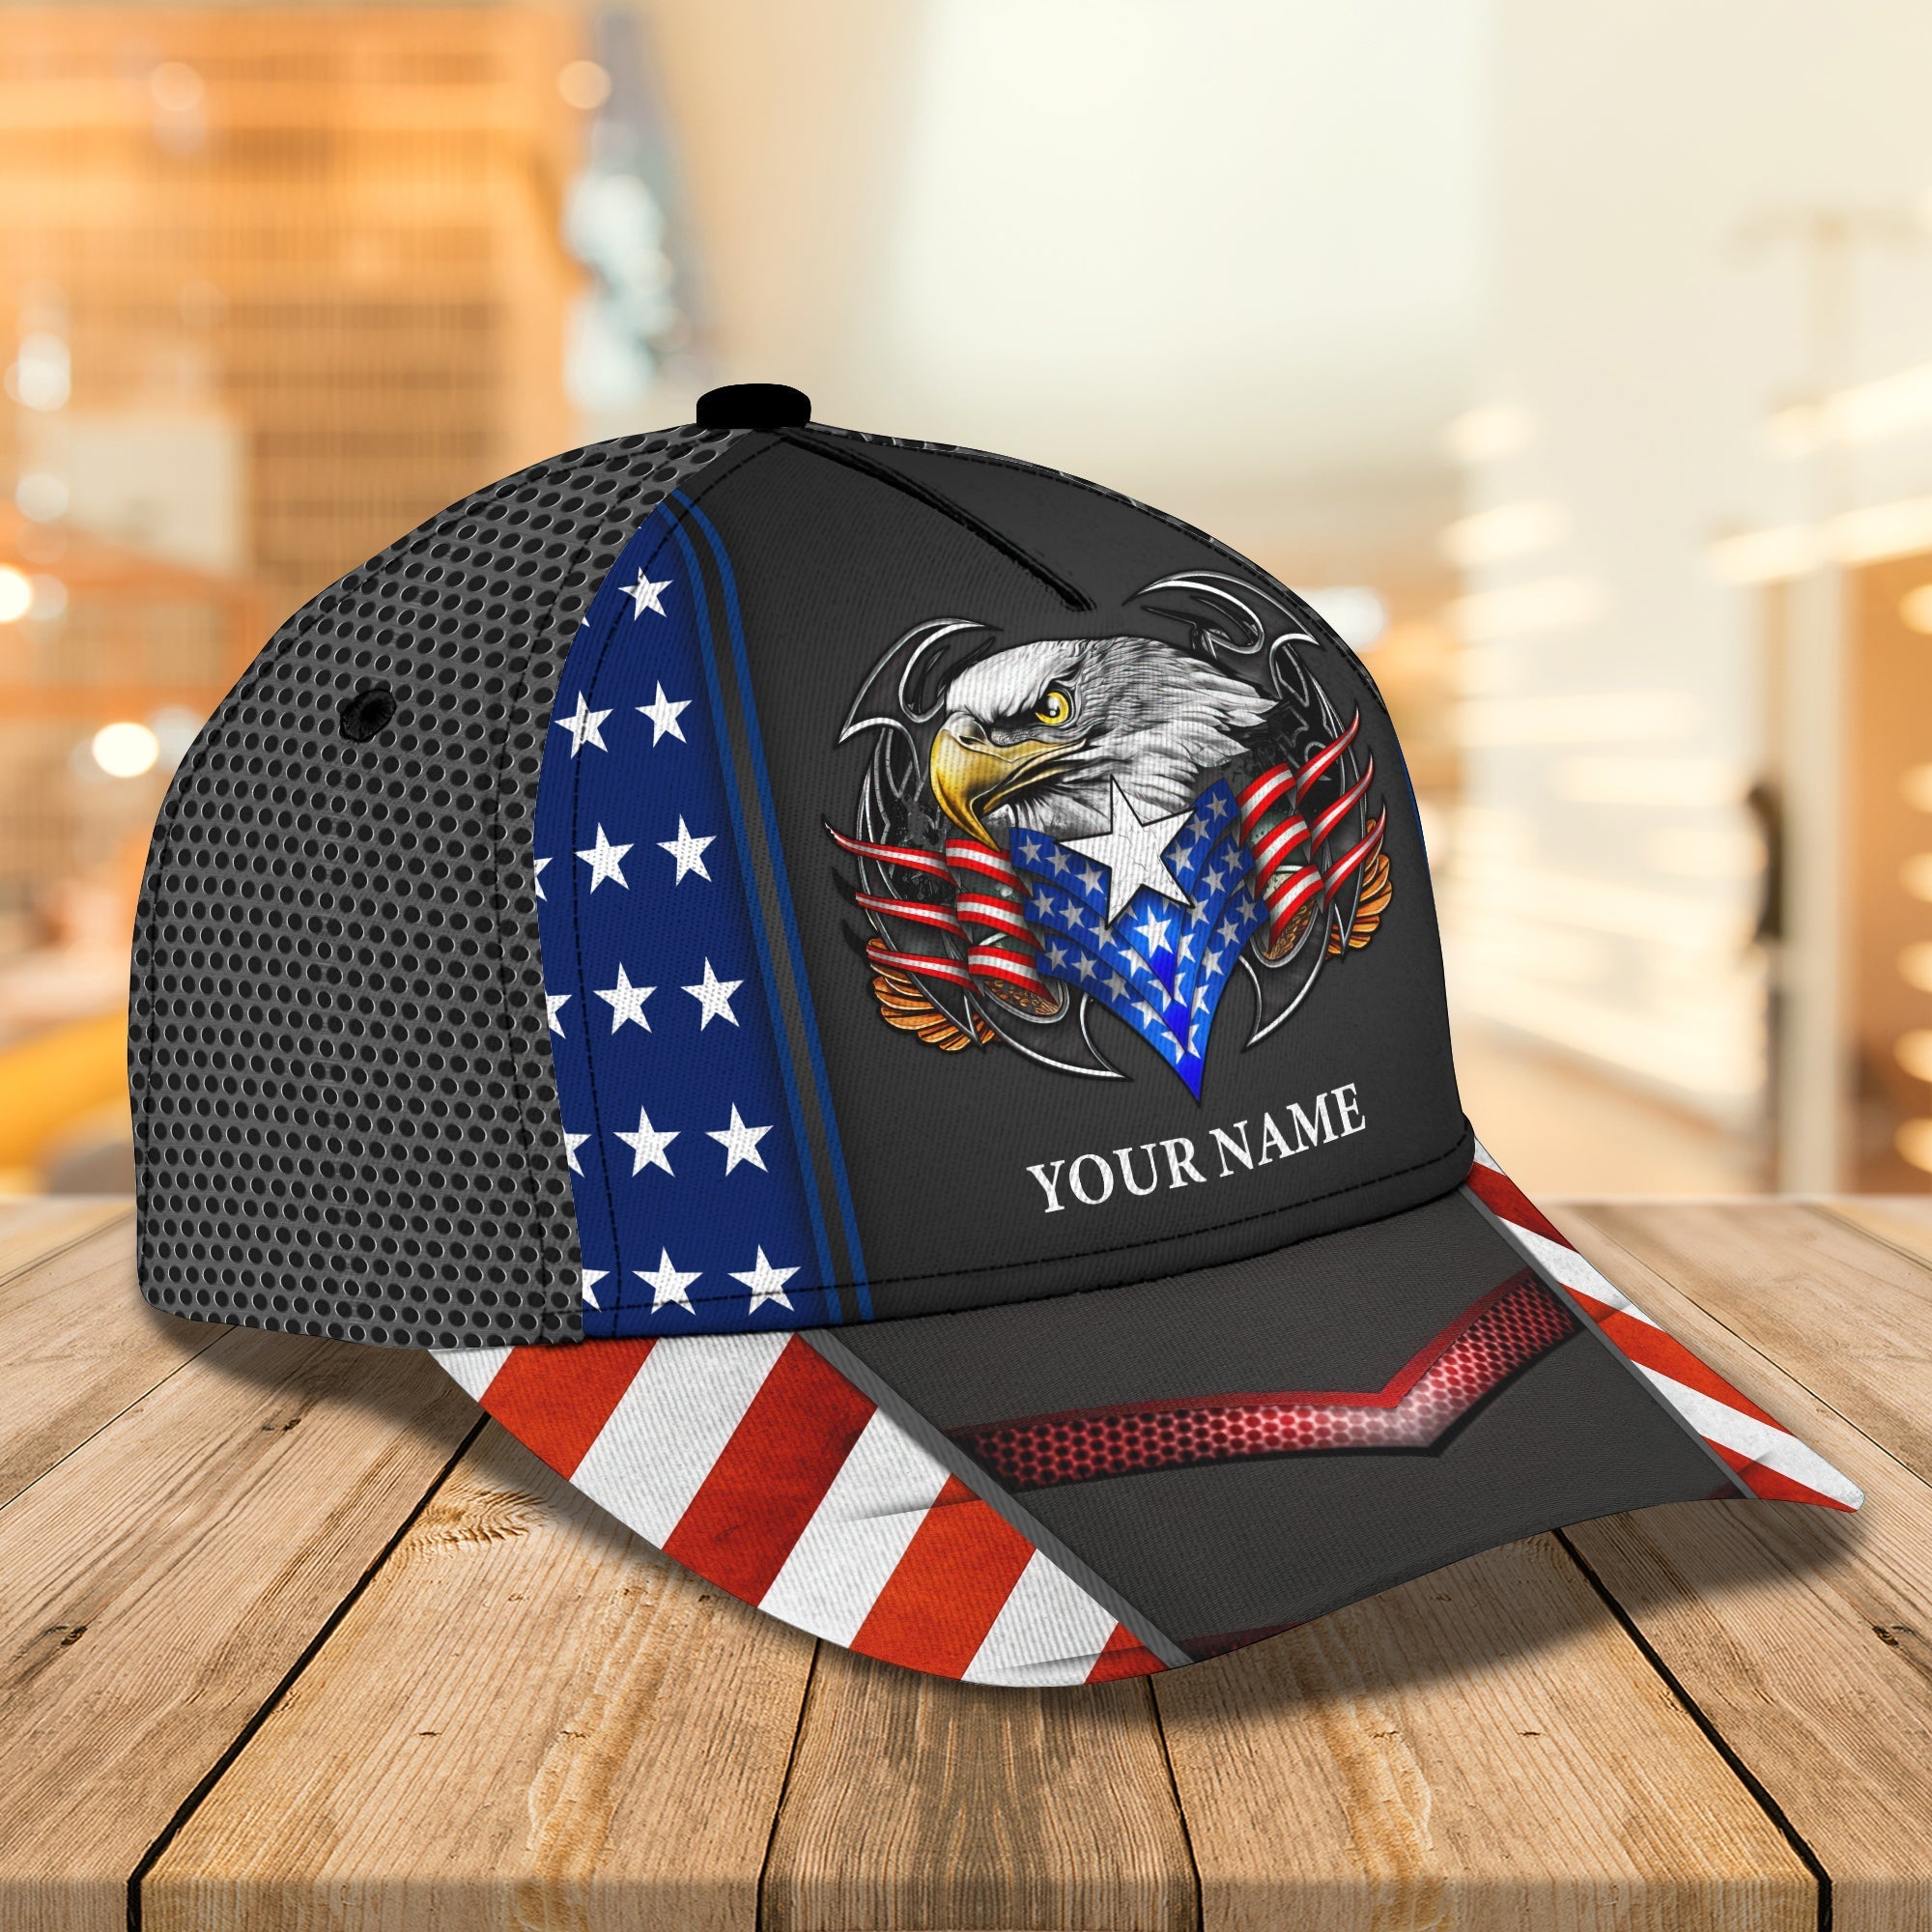 Customized With Name 3D Full Printed Patriotic Cap Hat/ Eagle American Flag Baseball Cap Hat/ Independence Day Cap Hat